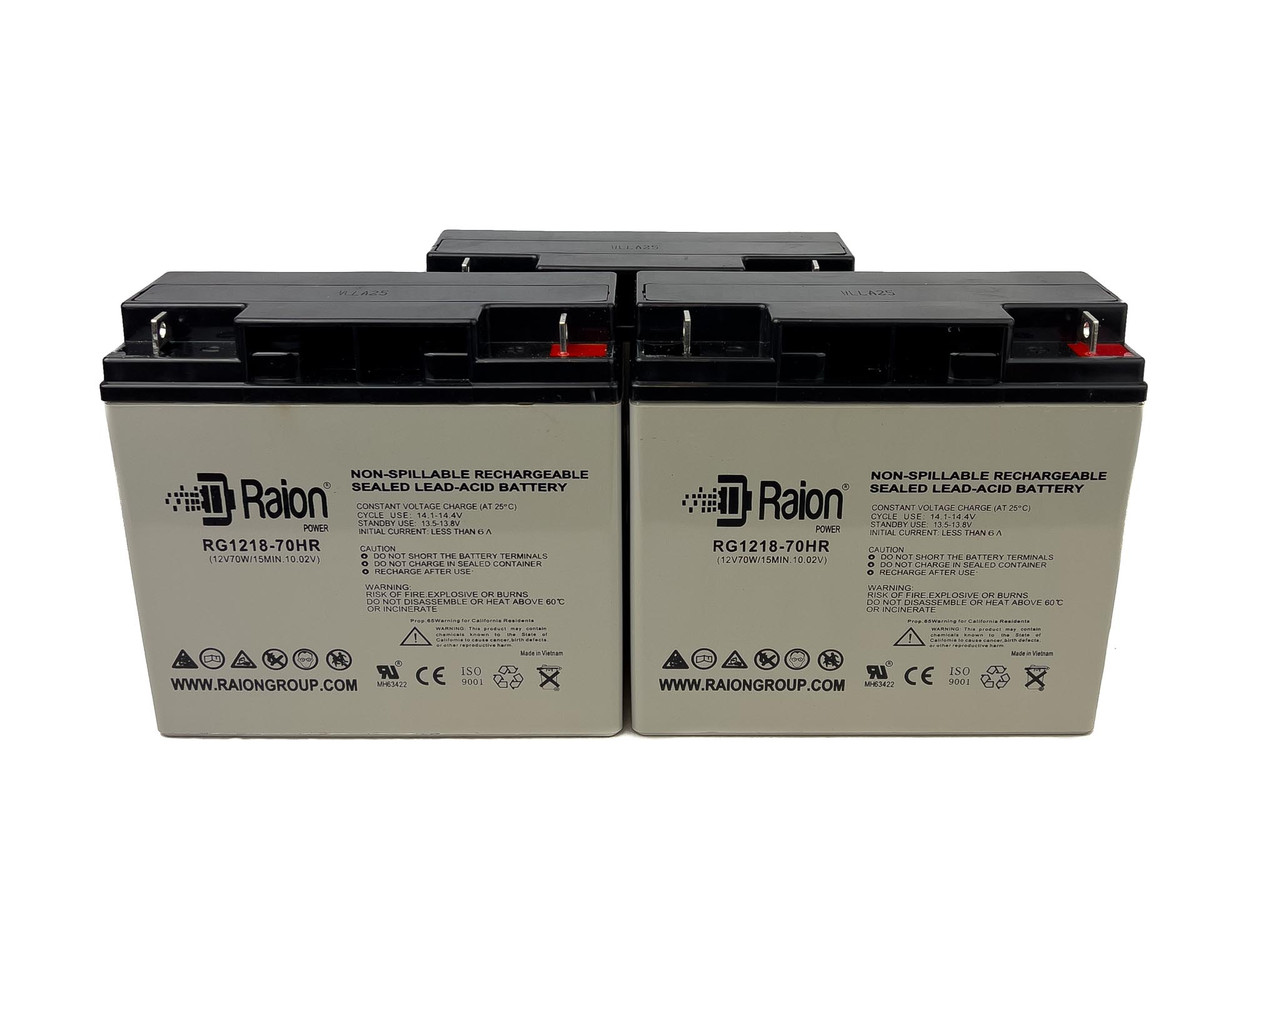 Raion Power RG1218-70HR 12V 18Ah Replacement UPS Battery for Alpha Technologies AS 1000 - 3 Pack